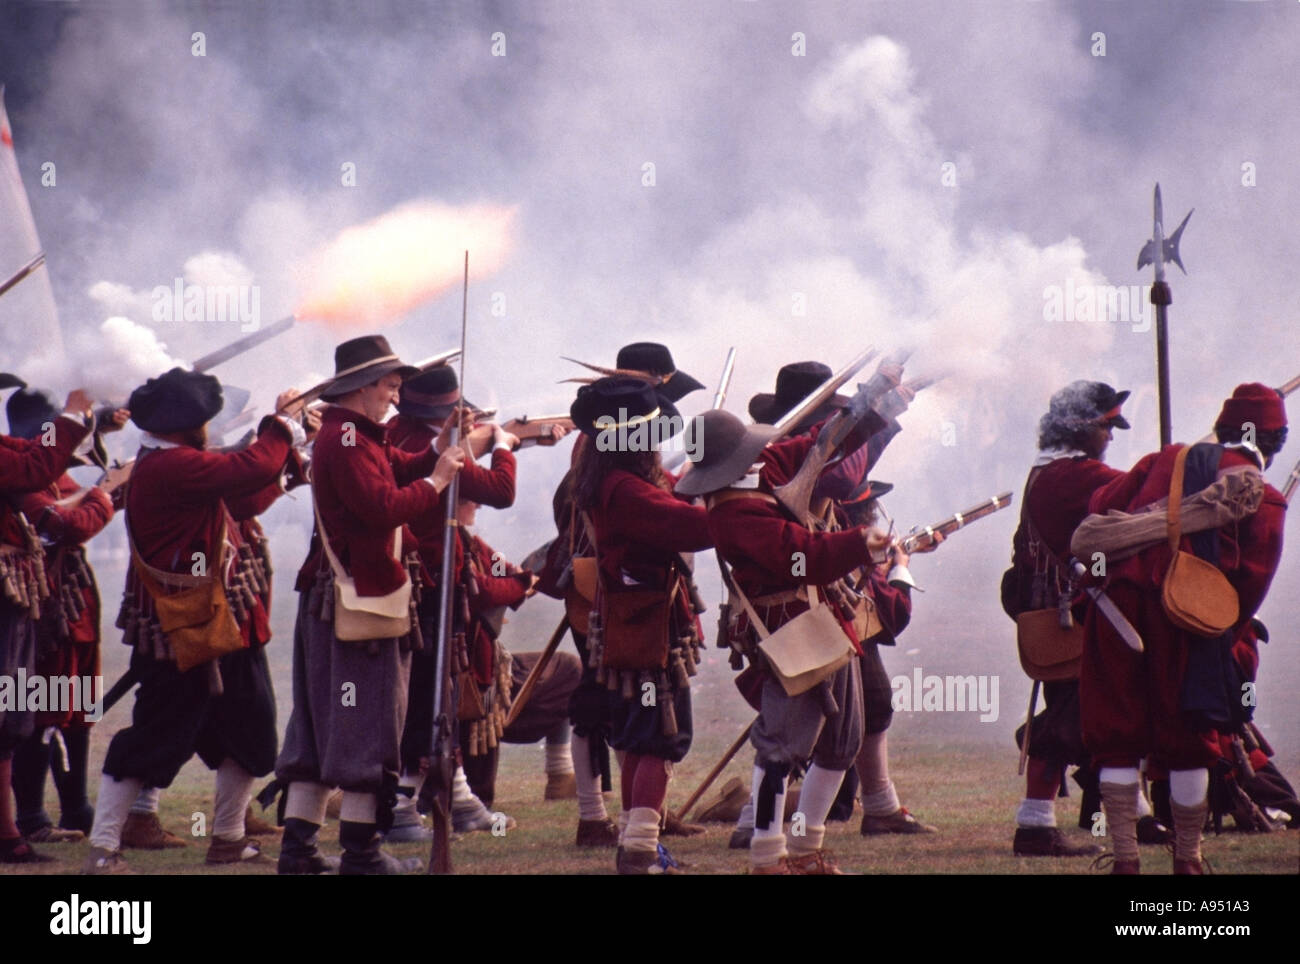 English Civil War reenactment by groups like English Civil War Society & Sealed Knot soldiers firing musket gun in battle flame & smoke period costume Stock Photo